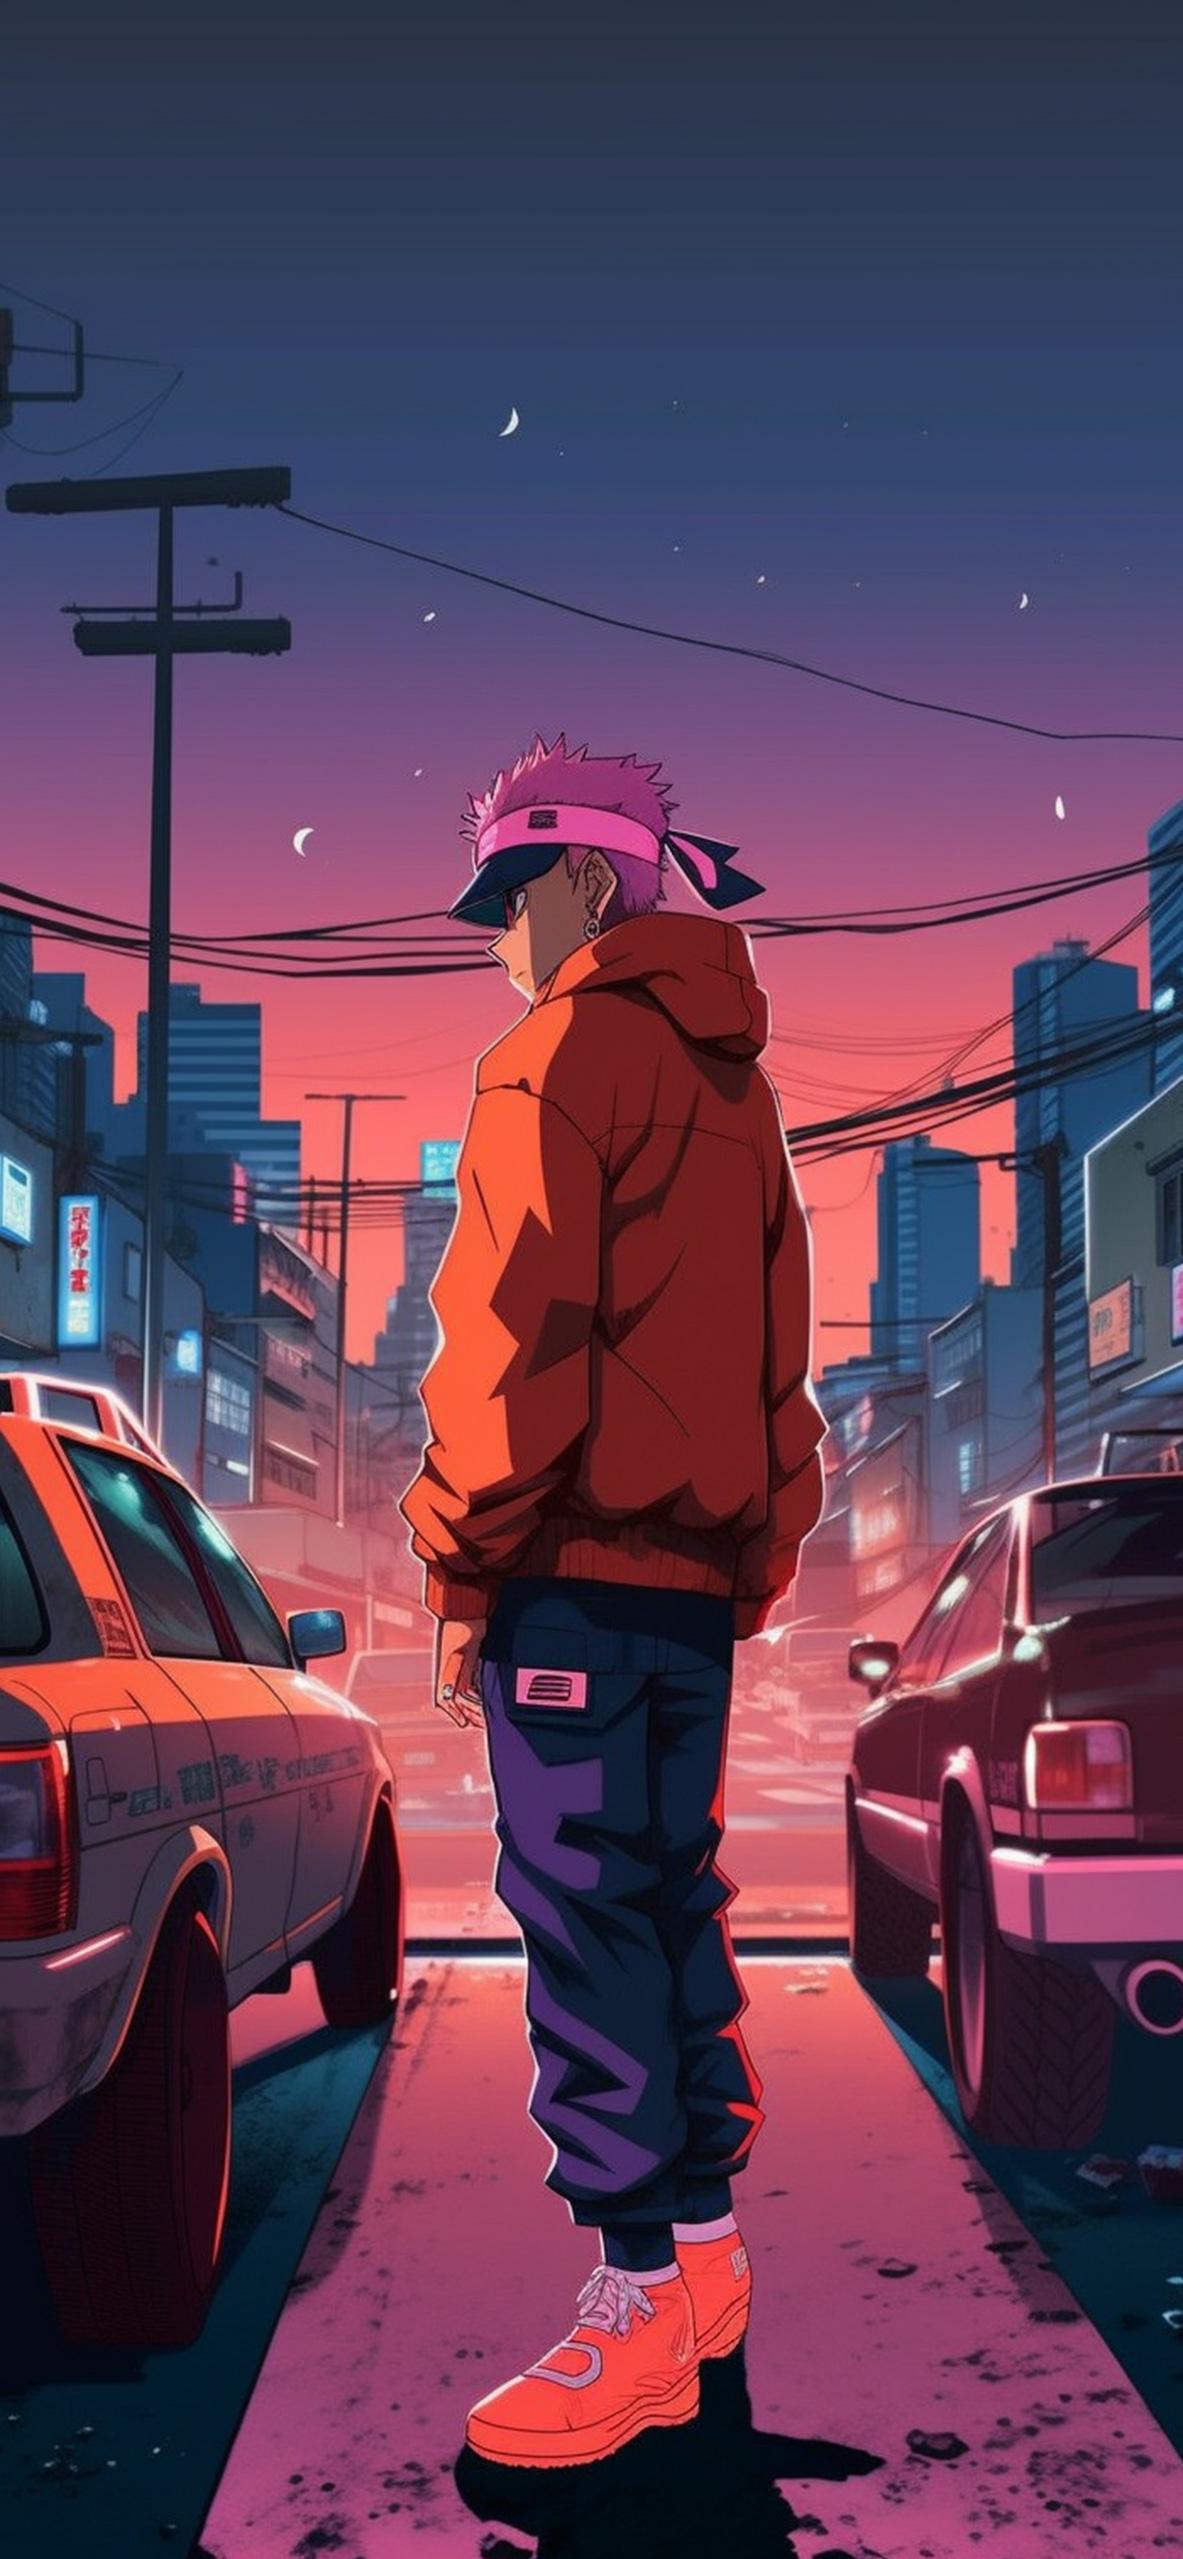 Naruto In The City Wallpaper Aesthetic iPhone